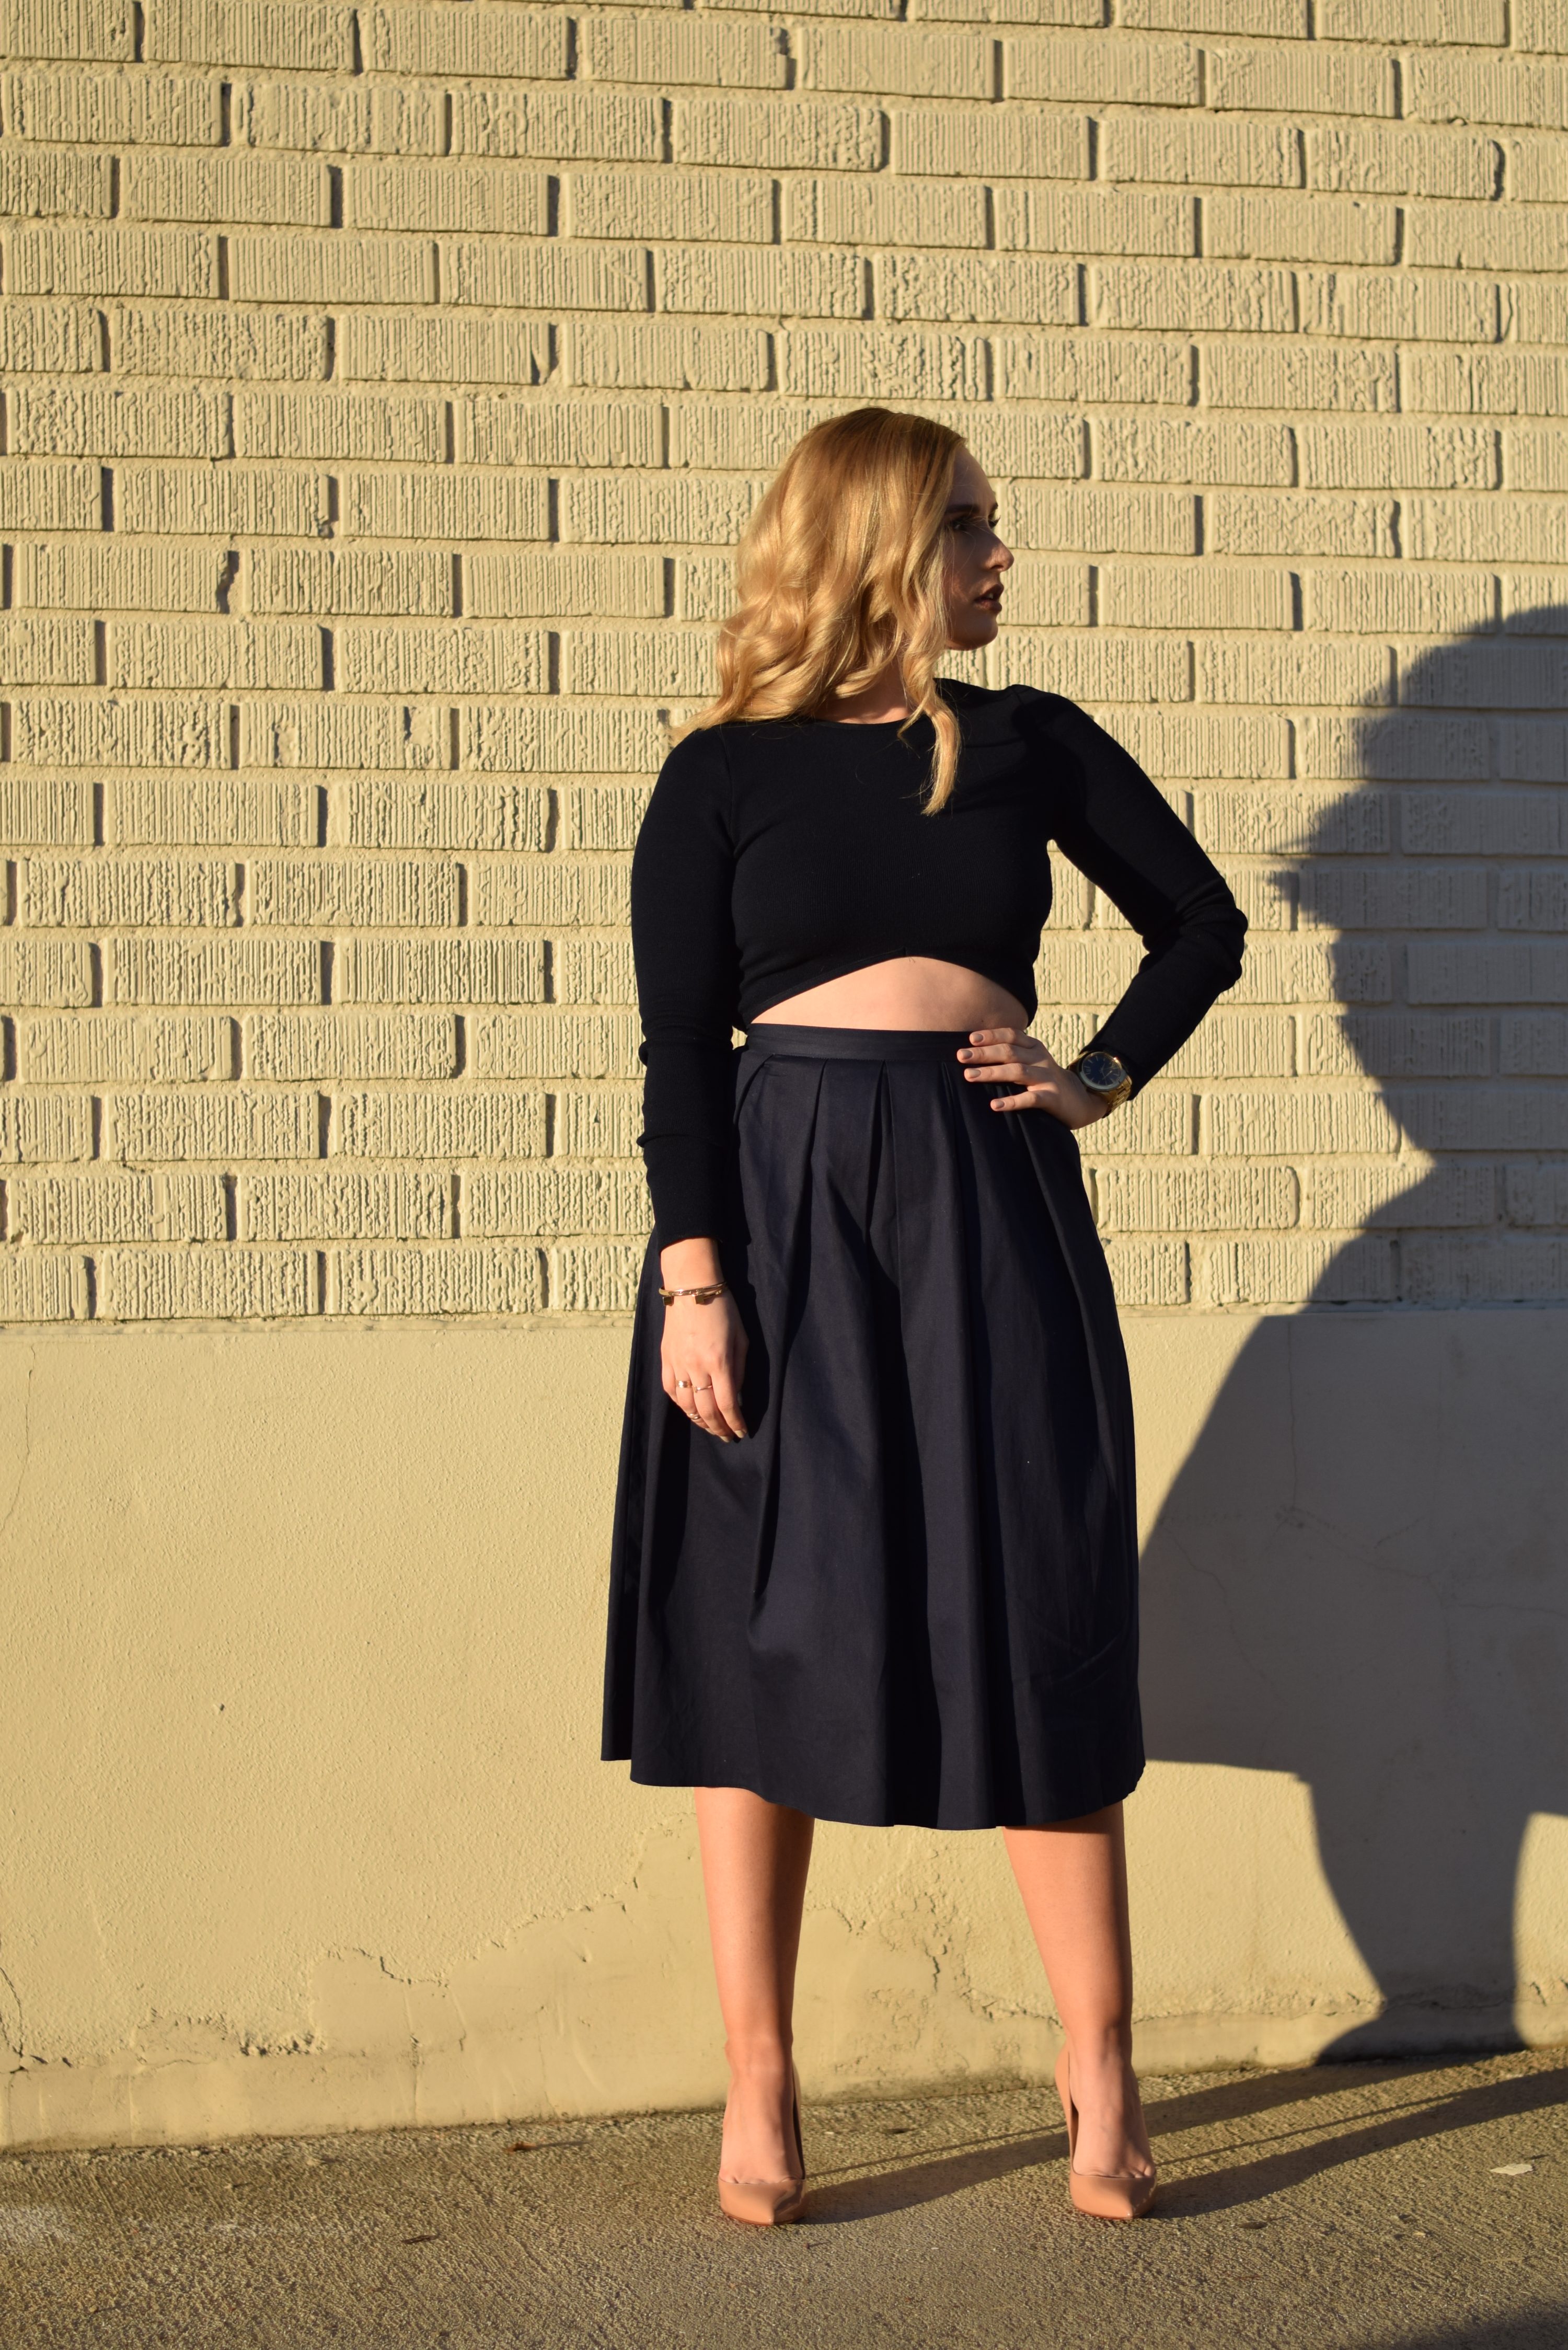 How to Style an A-Line Skirt - LaurenJaclyn.com